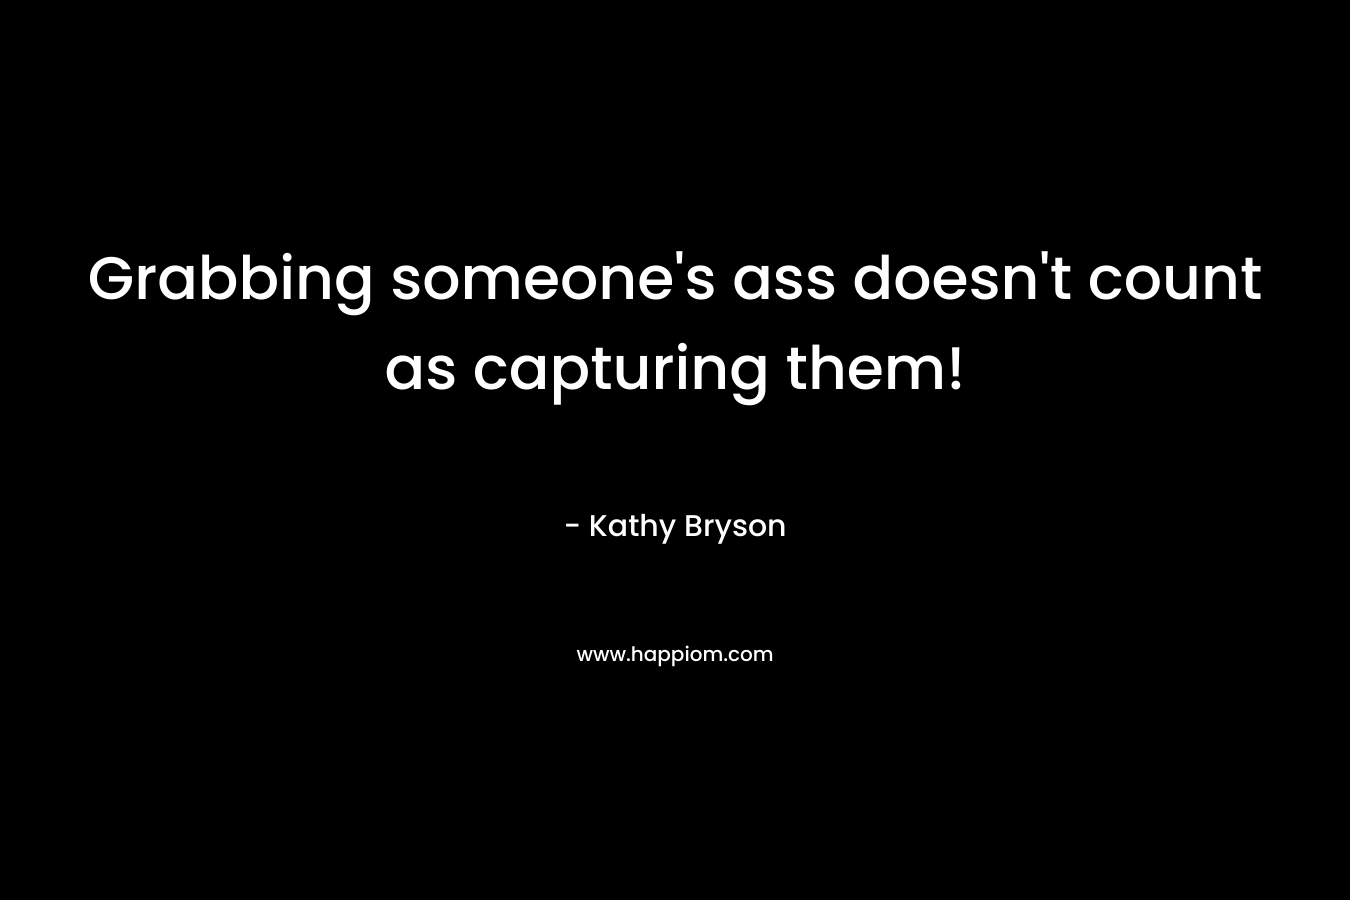 Grabbing someone’s ass doesn’t count as capturing them! – Kathy Bryson